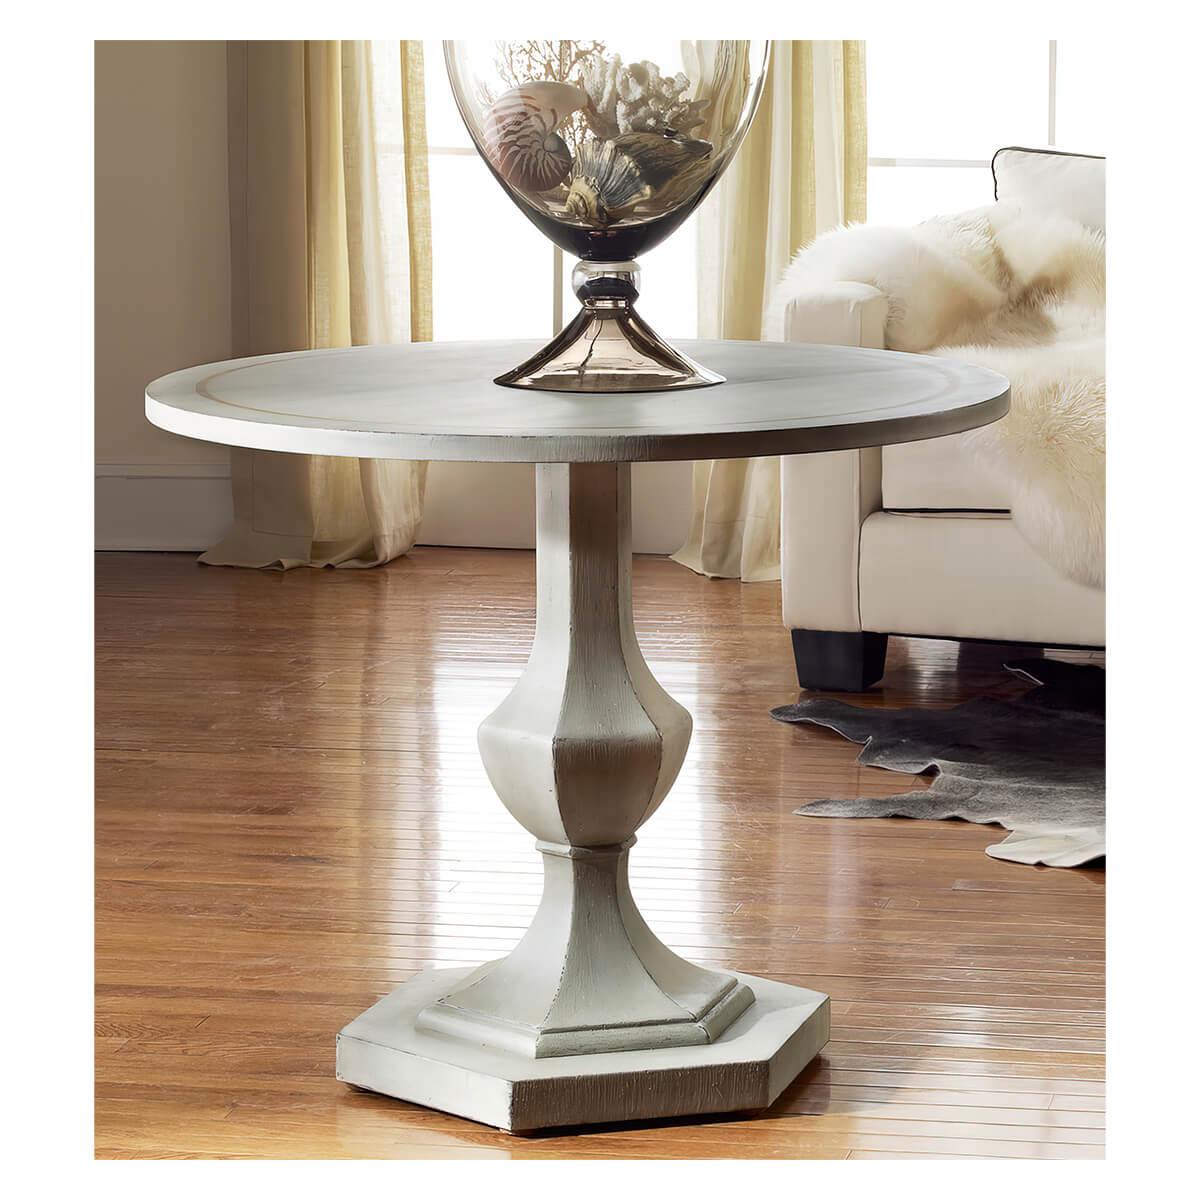 Grey Painted Neo Classic Center Table with an antique grey hand painted finish and a gold leaf accent banding to the round top. With a hexagonal column stepped pedestal base.

Dimensions: 36